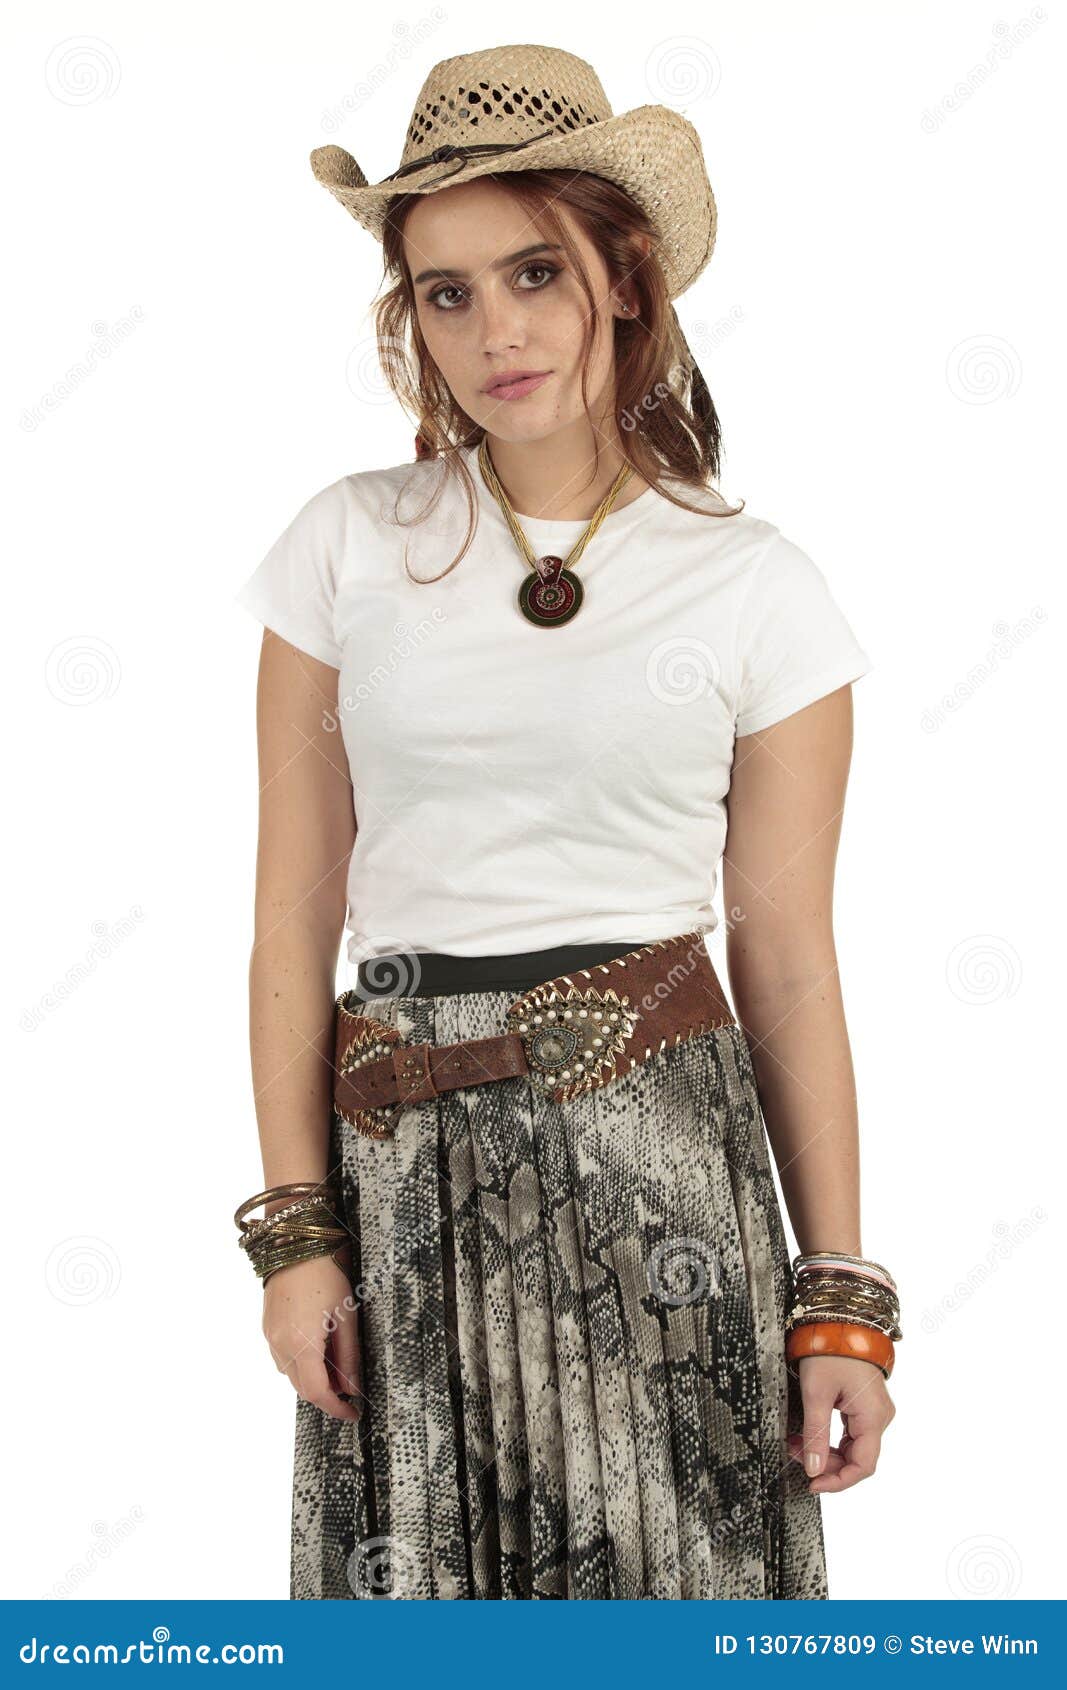 Summer Festival Style Cute Model Wearing a Empty Space White T-shirt and Cowboy  Hat Stock Image - Image of fashionable, attractive: 130767809